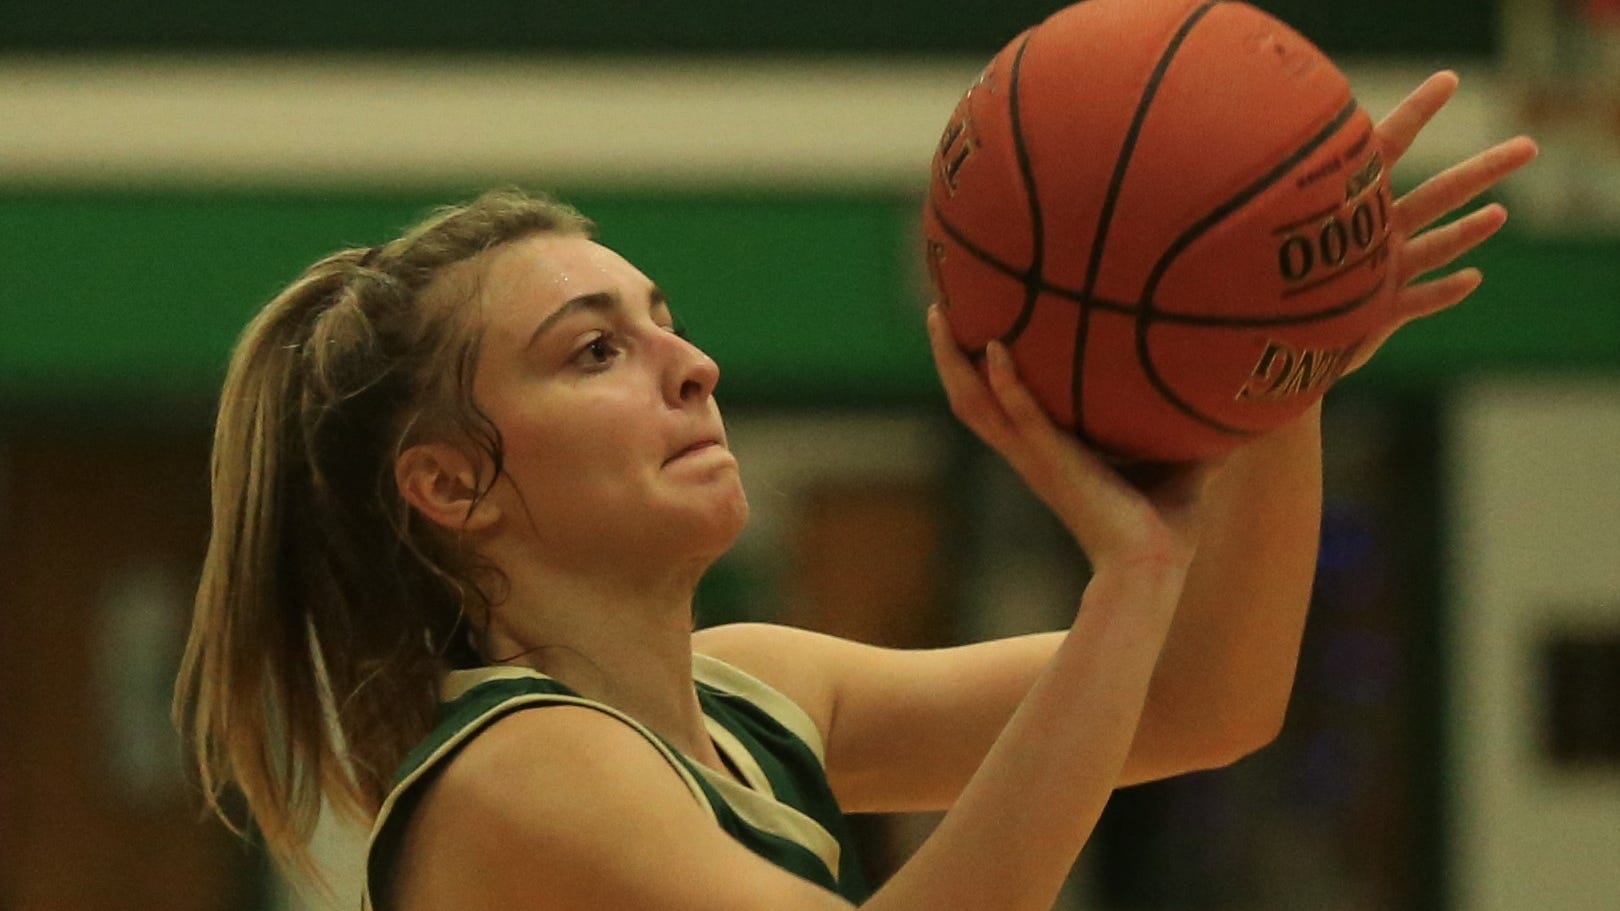  GIRLS BASKETBALL: No. 17 Harper shakes up 29-2A with second win over No. 15 Mason 